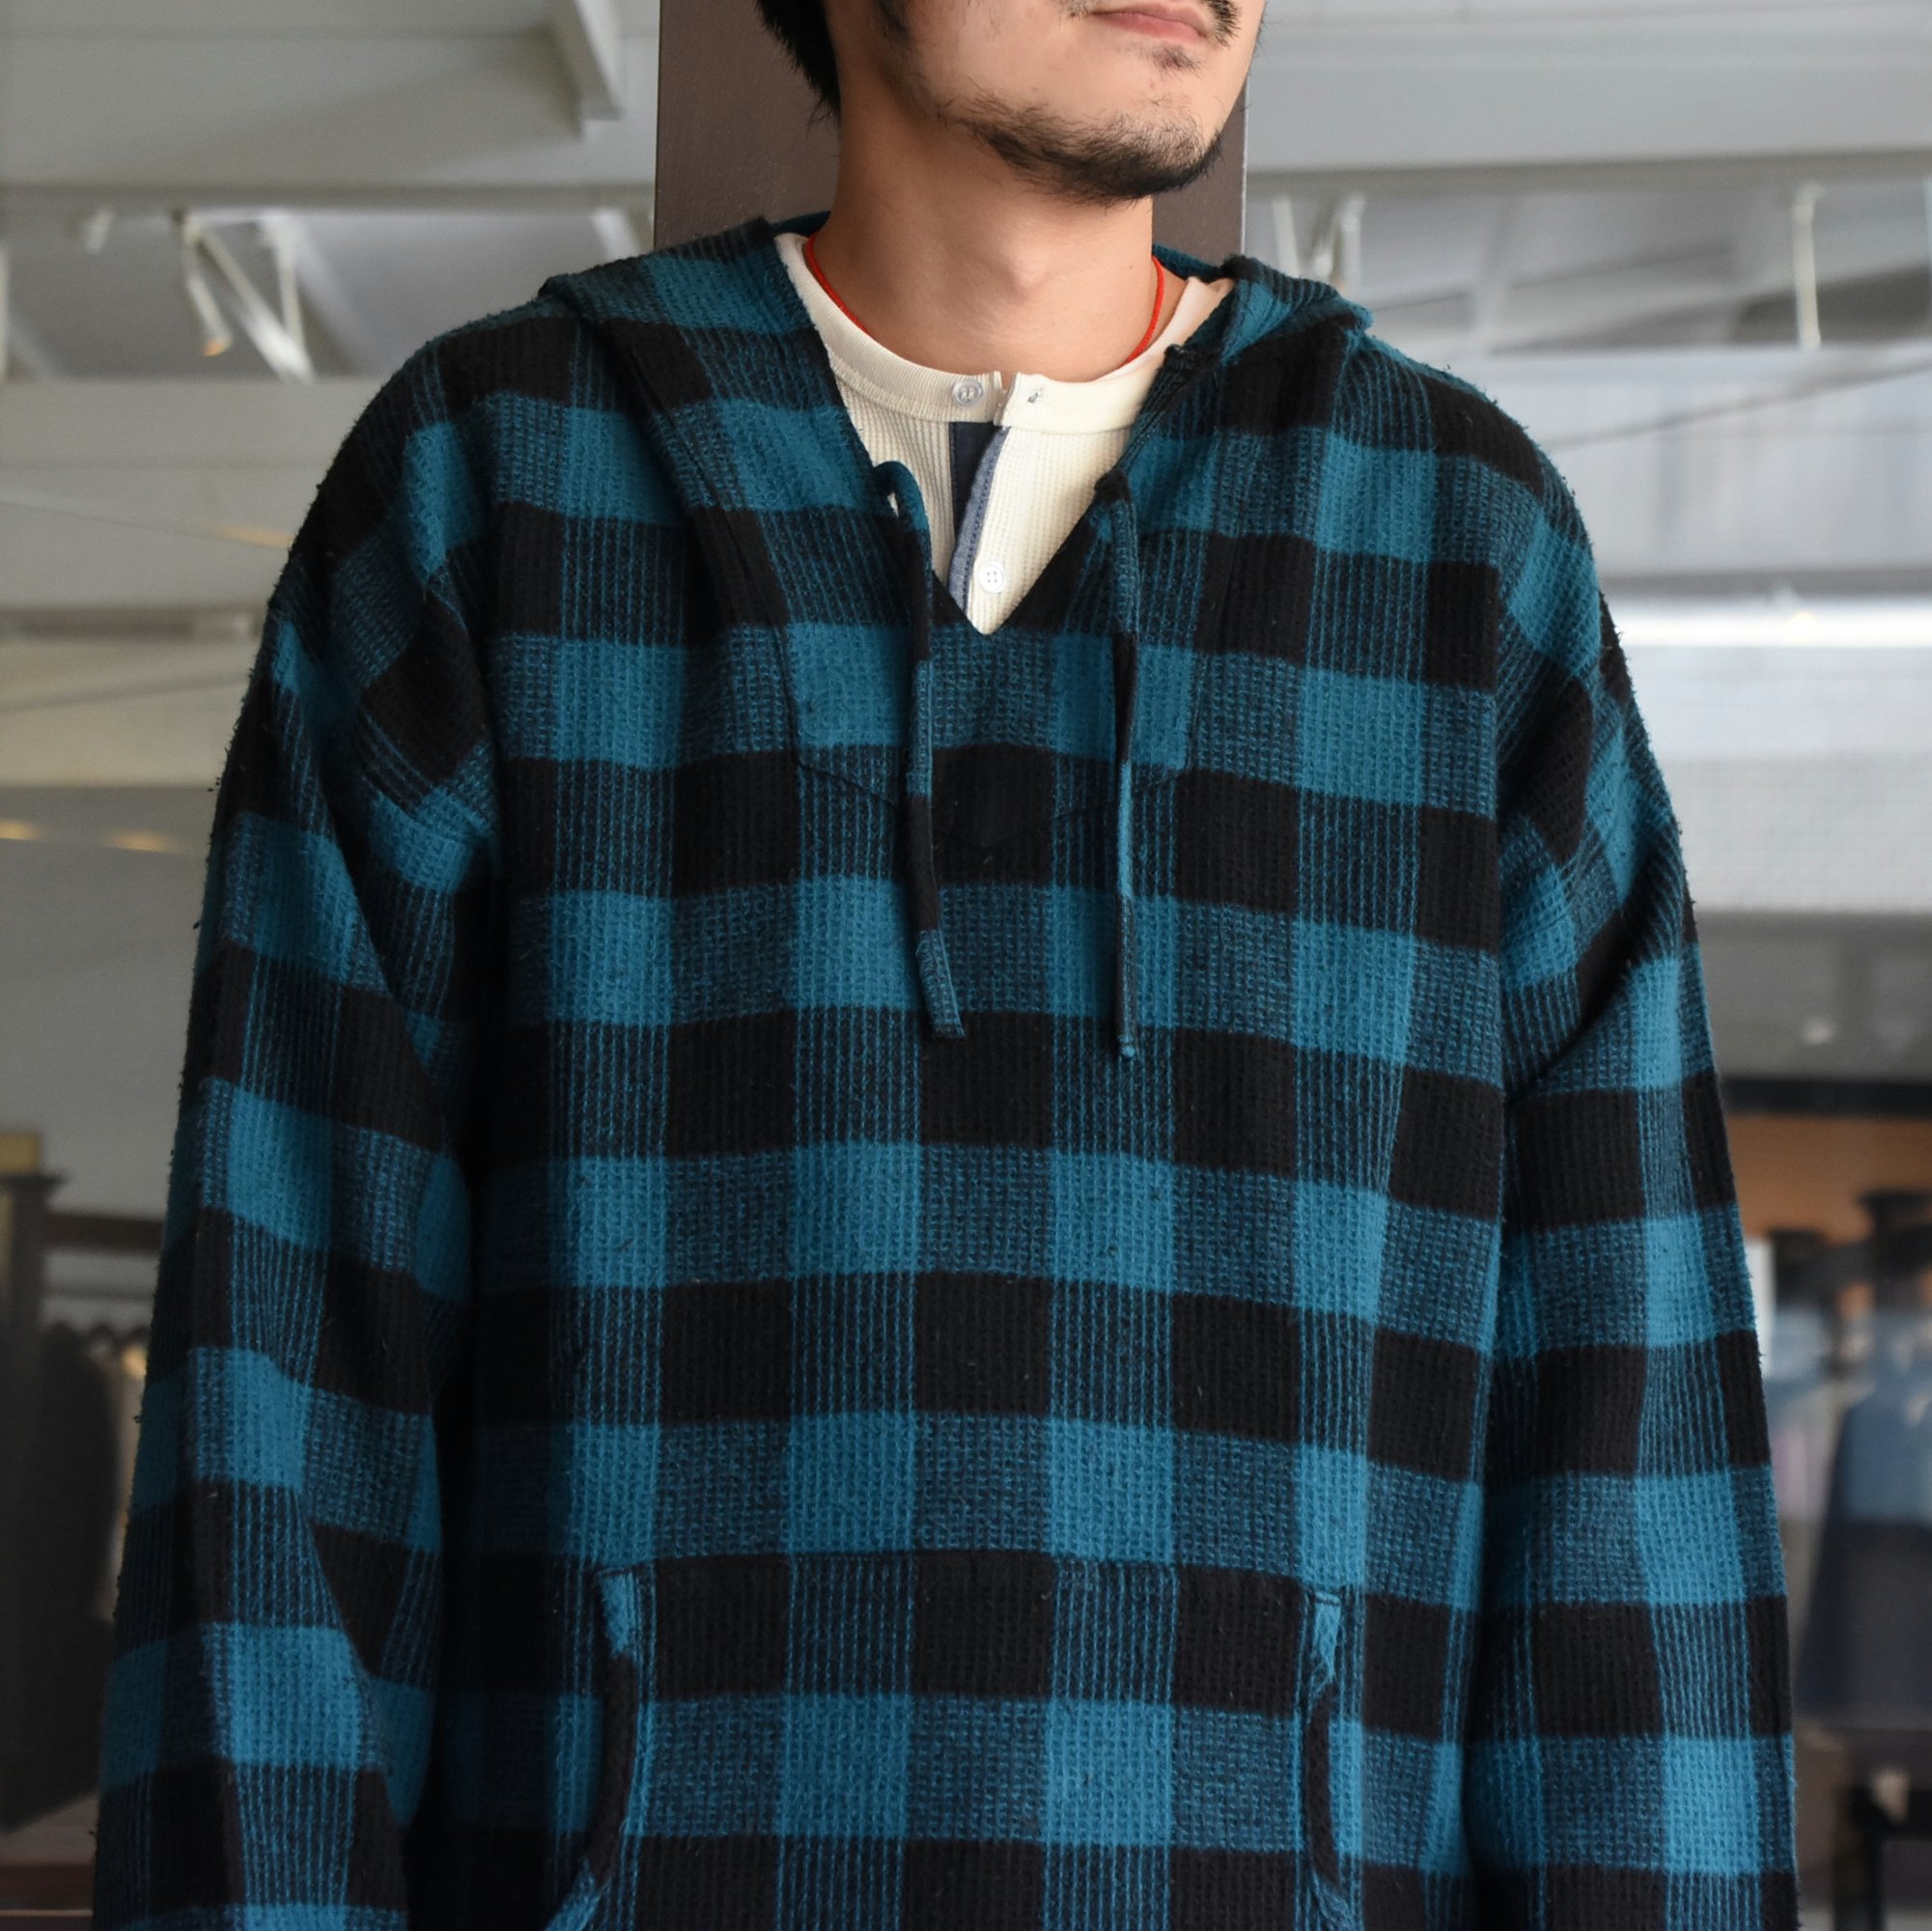 40% off sale】South2 West8(サウスツーウエストエイト) Mexican Parka 